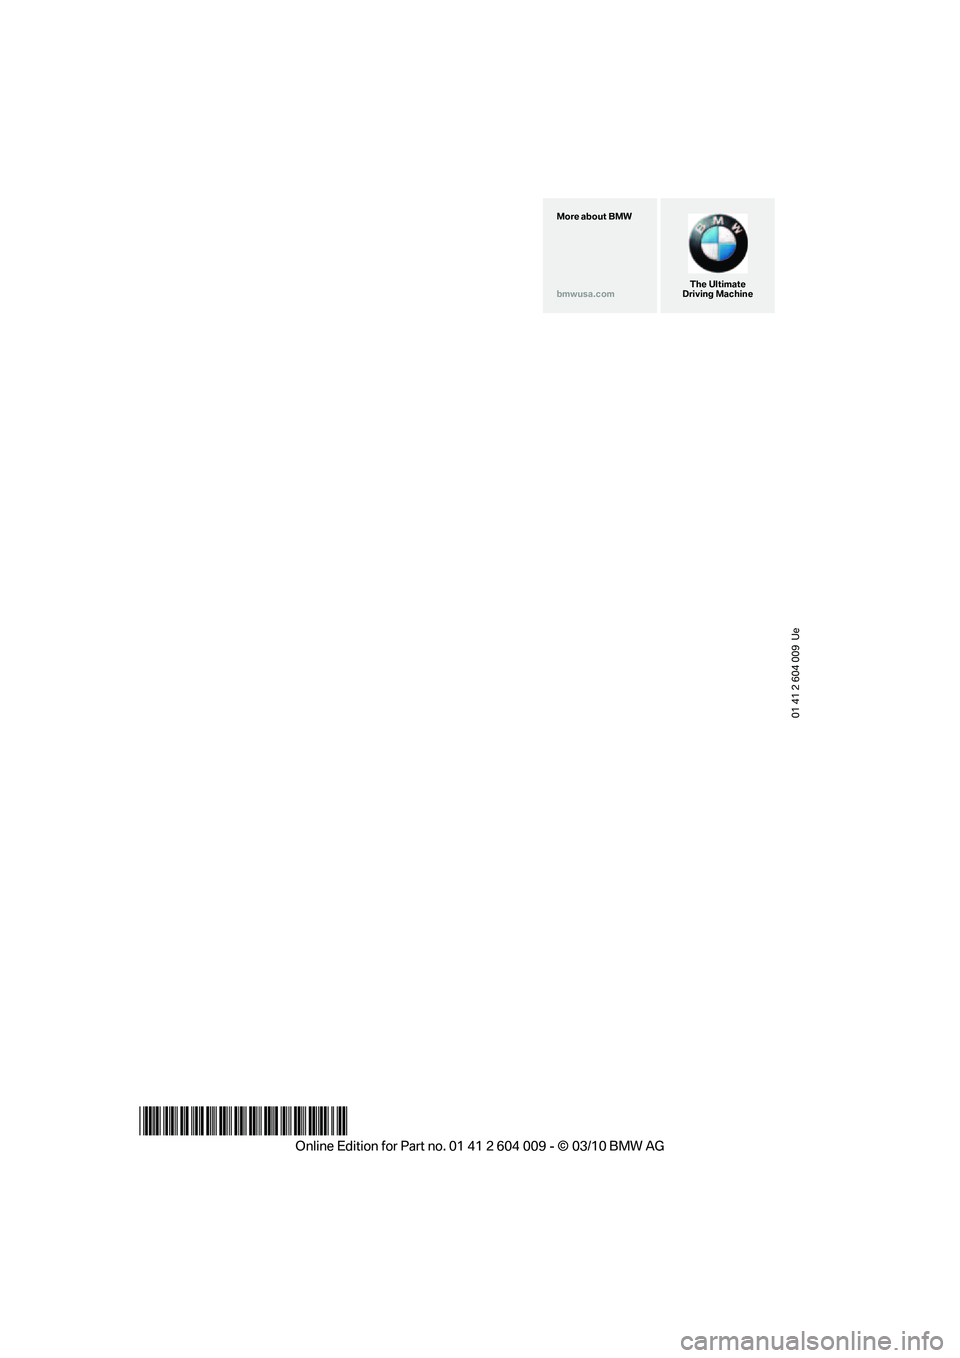 BMW X5 XDRIVE 35I SPORT ACTIVITY 2011  Owners Manual 01 41 2 604 009  Ue
*BL260400900P*
The Ultimate
Driving Machine More about BMW
bmwusa.com 